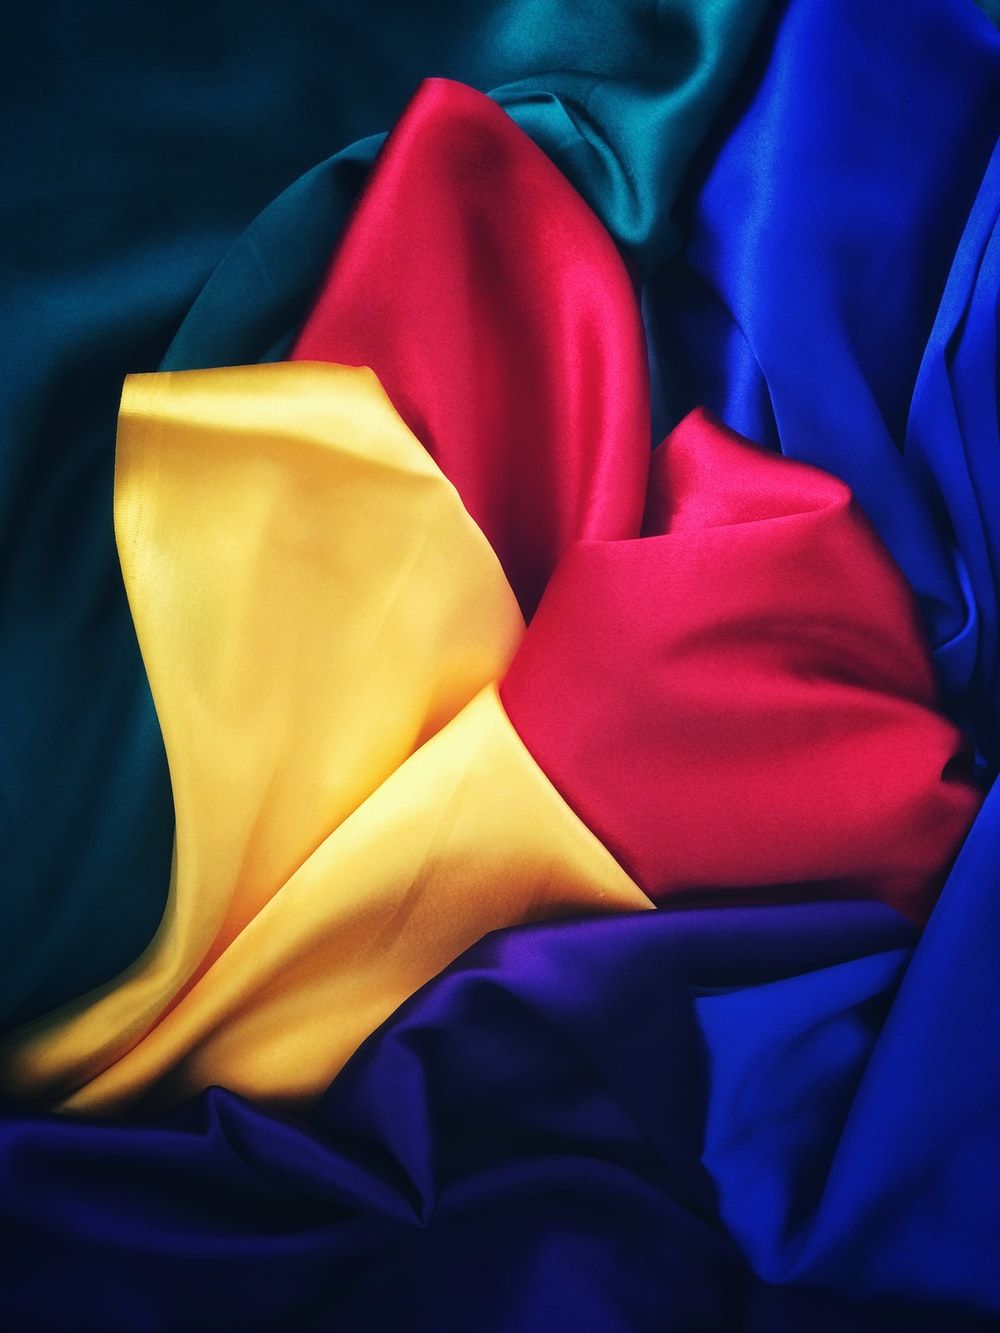 Romania Flag Picture. Download Free Image